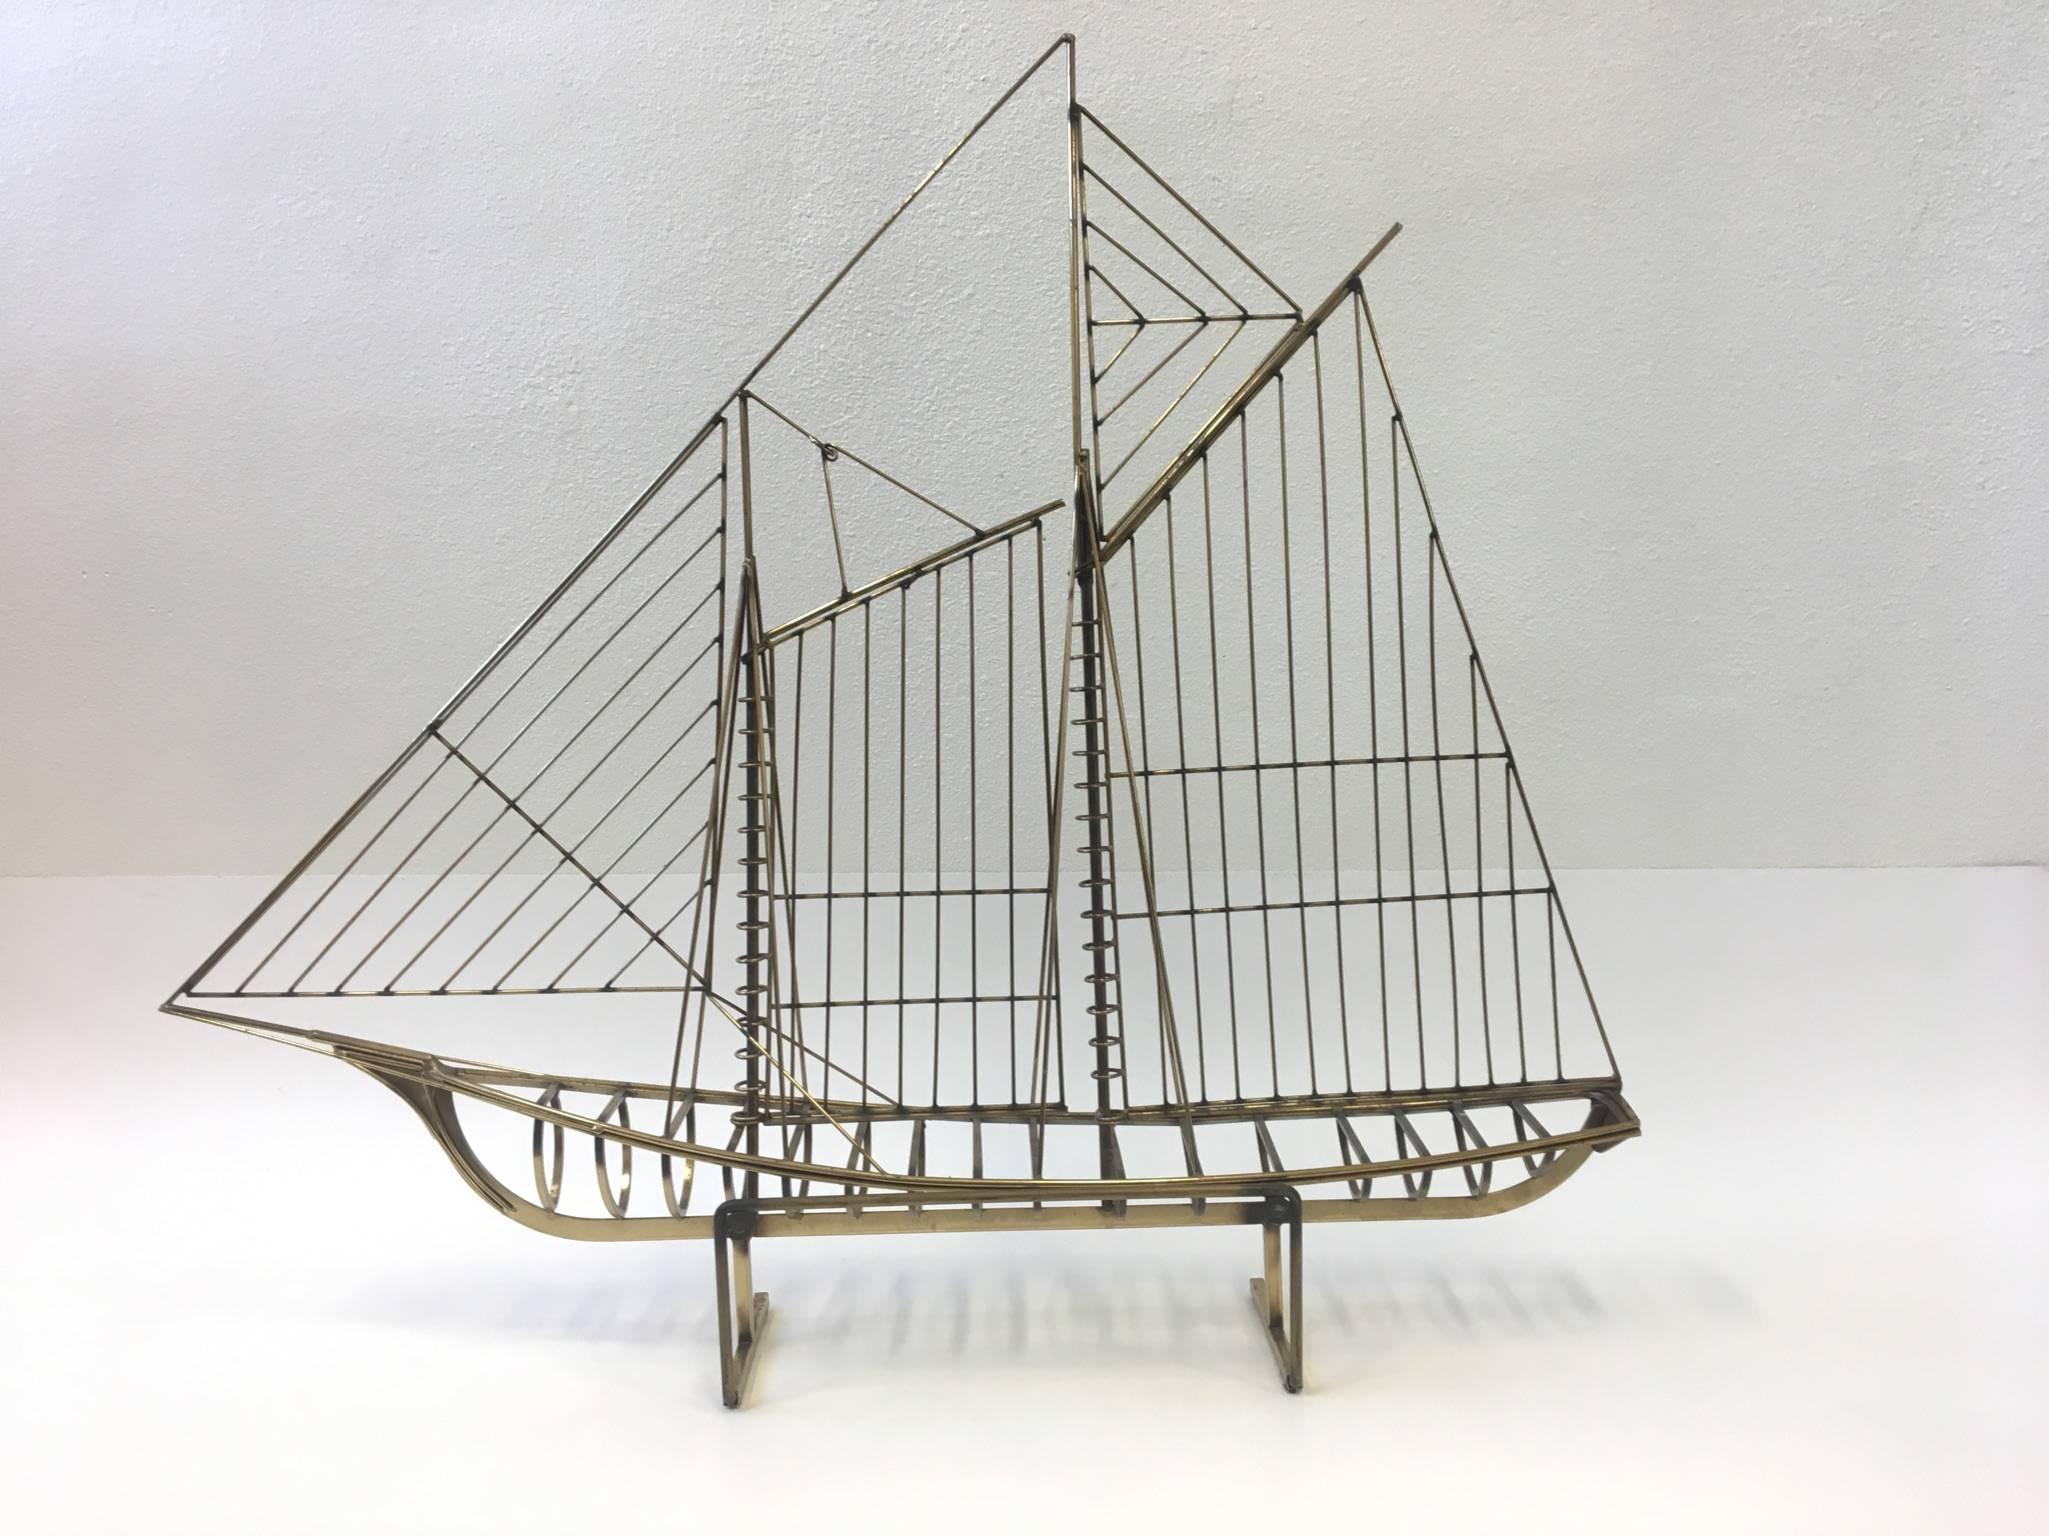 A 1976 large brass ship sculpture by Curtis Jeré. The sculpture is in original condition. So it shows some age, it's signed and dated. The sculpture can be mounted on the wall if desired. 
Dimensions: 47 inches wide, 7 inches deep, 41 inches high.